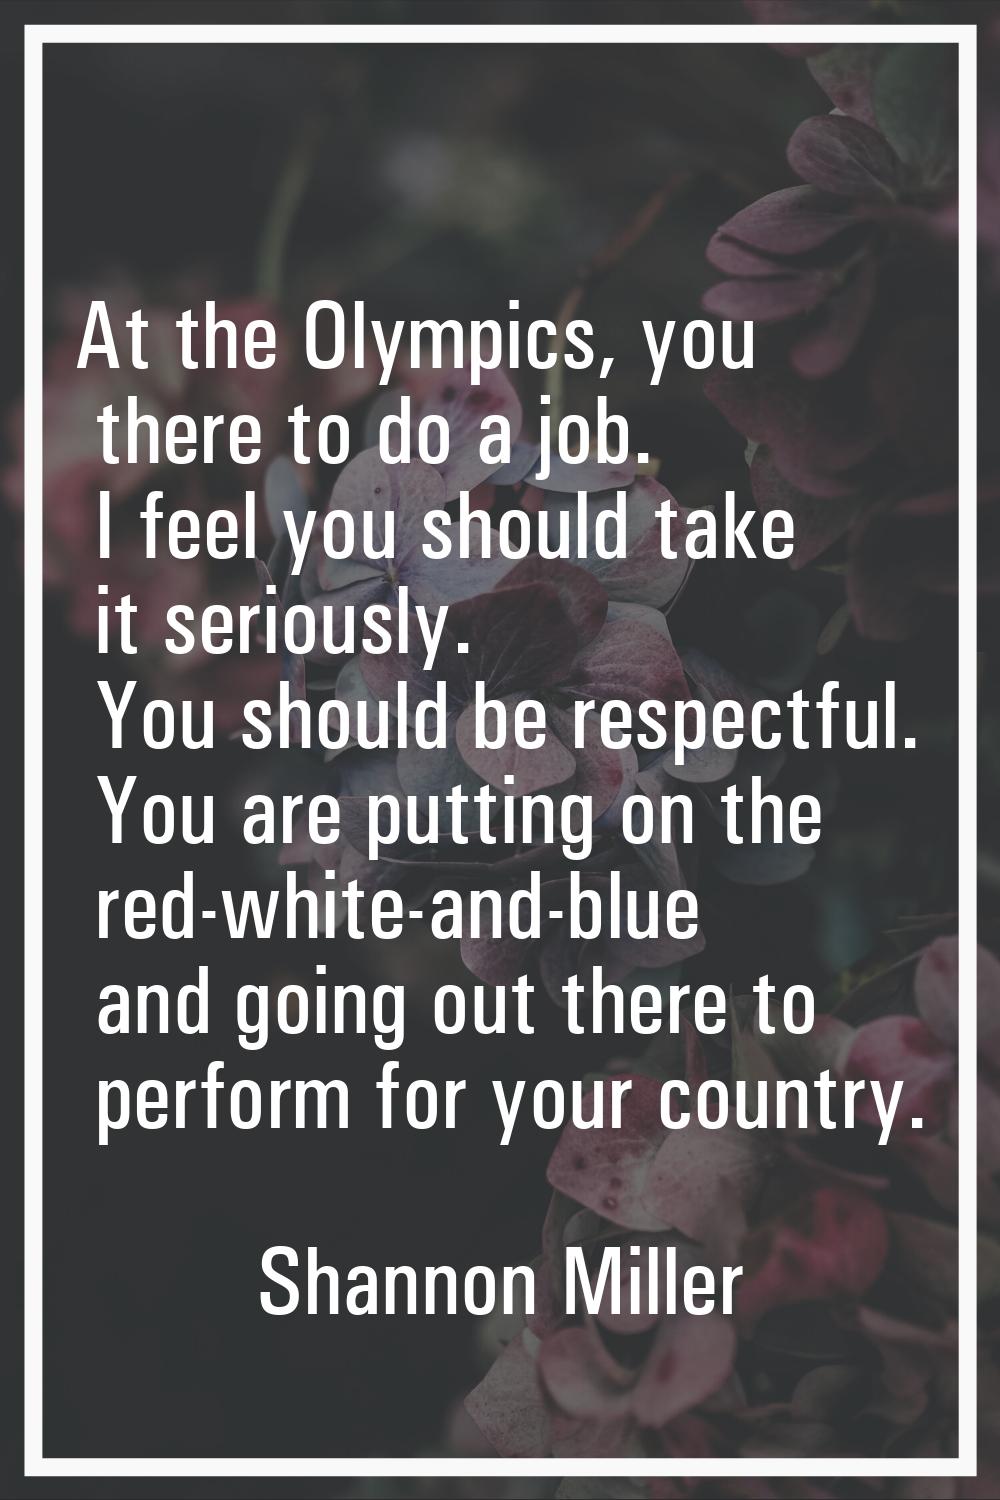 At the Olympics, you there to do a job. I feel you should take it seriously. You should be respectf